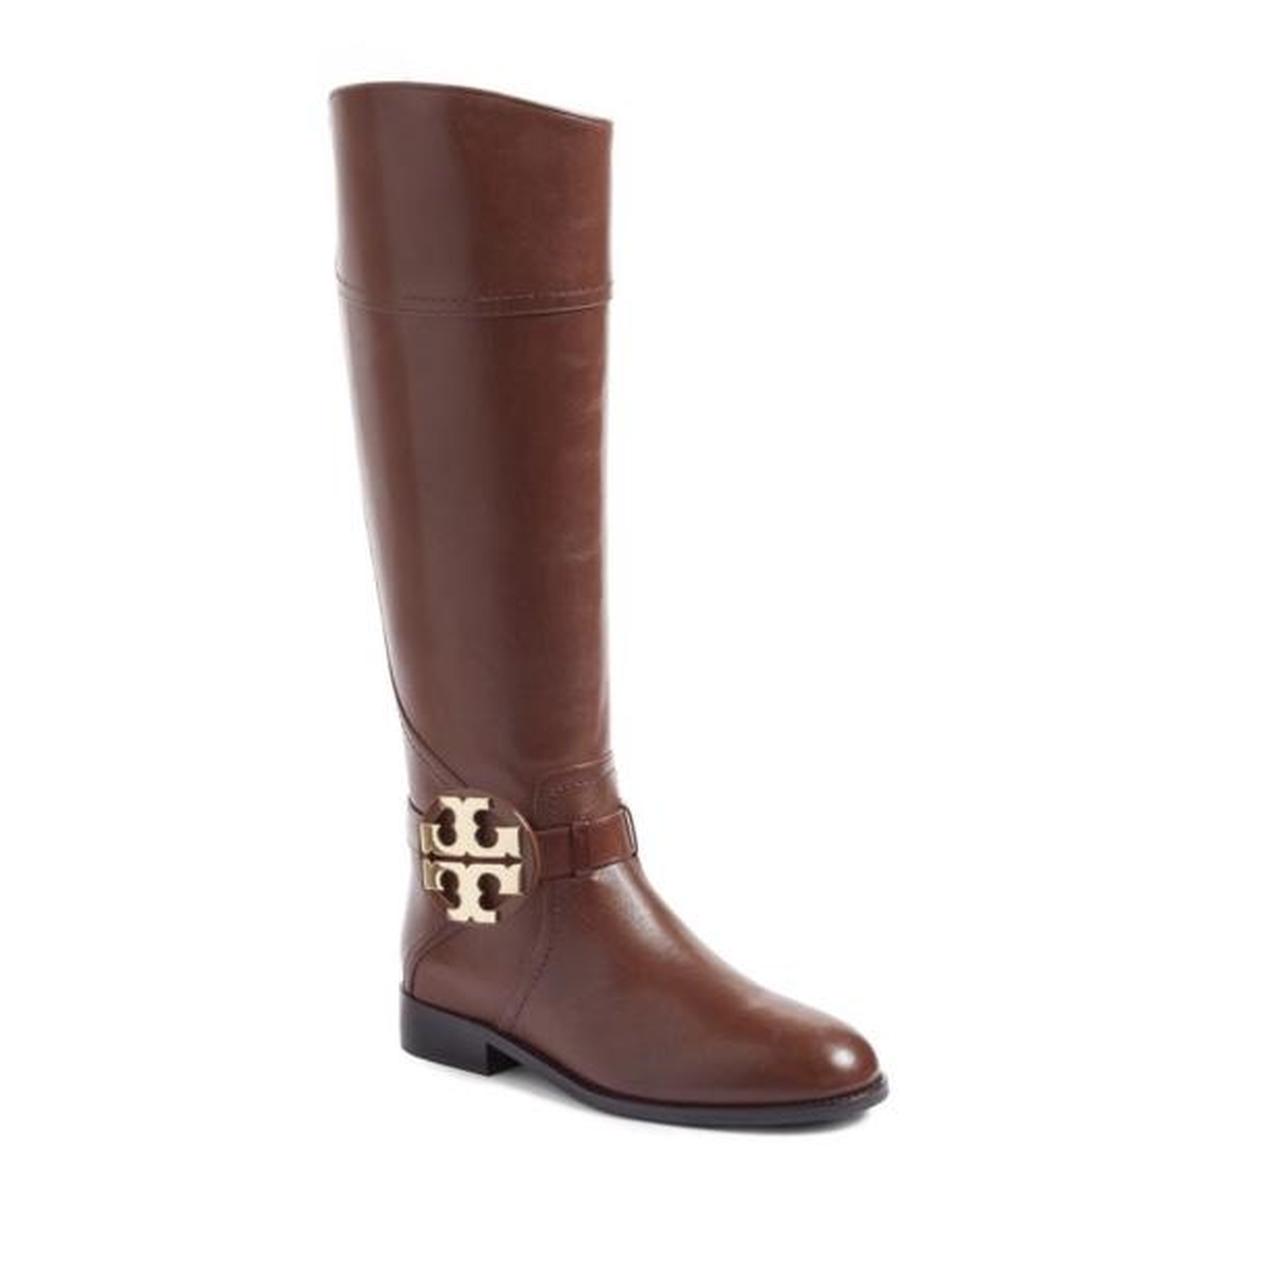 Tory Burch Women's Brown and Gold Boots | Depop